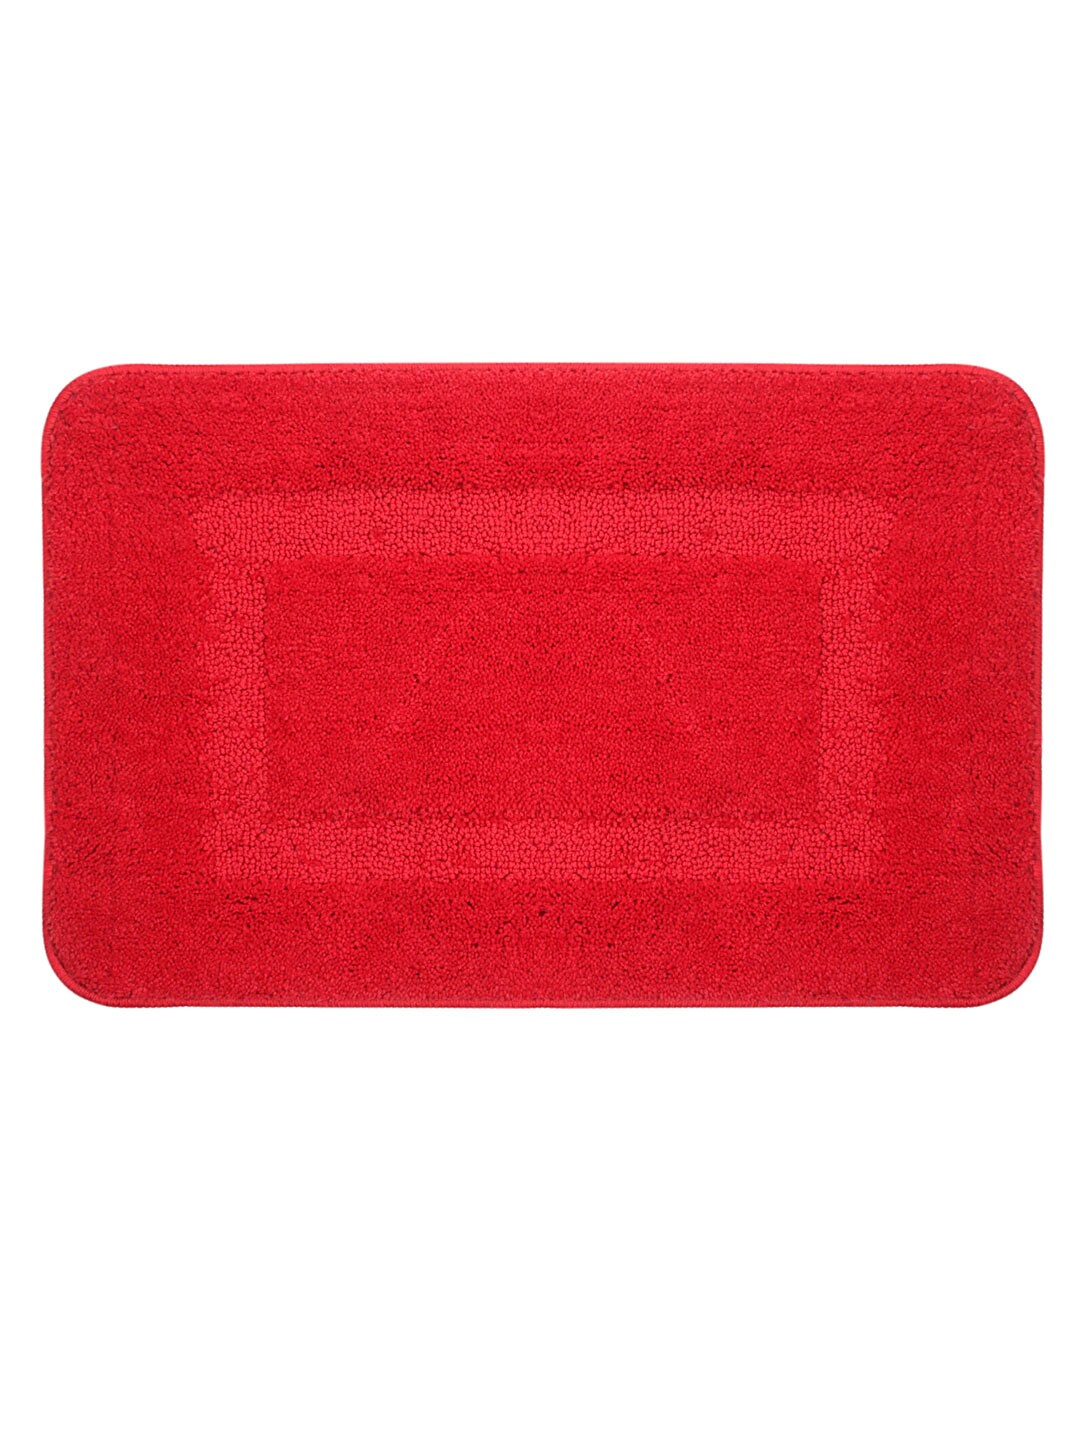 Saral Home Red Rectangular Bath Rug Price in India